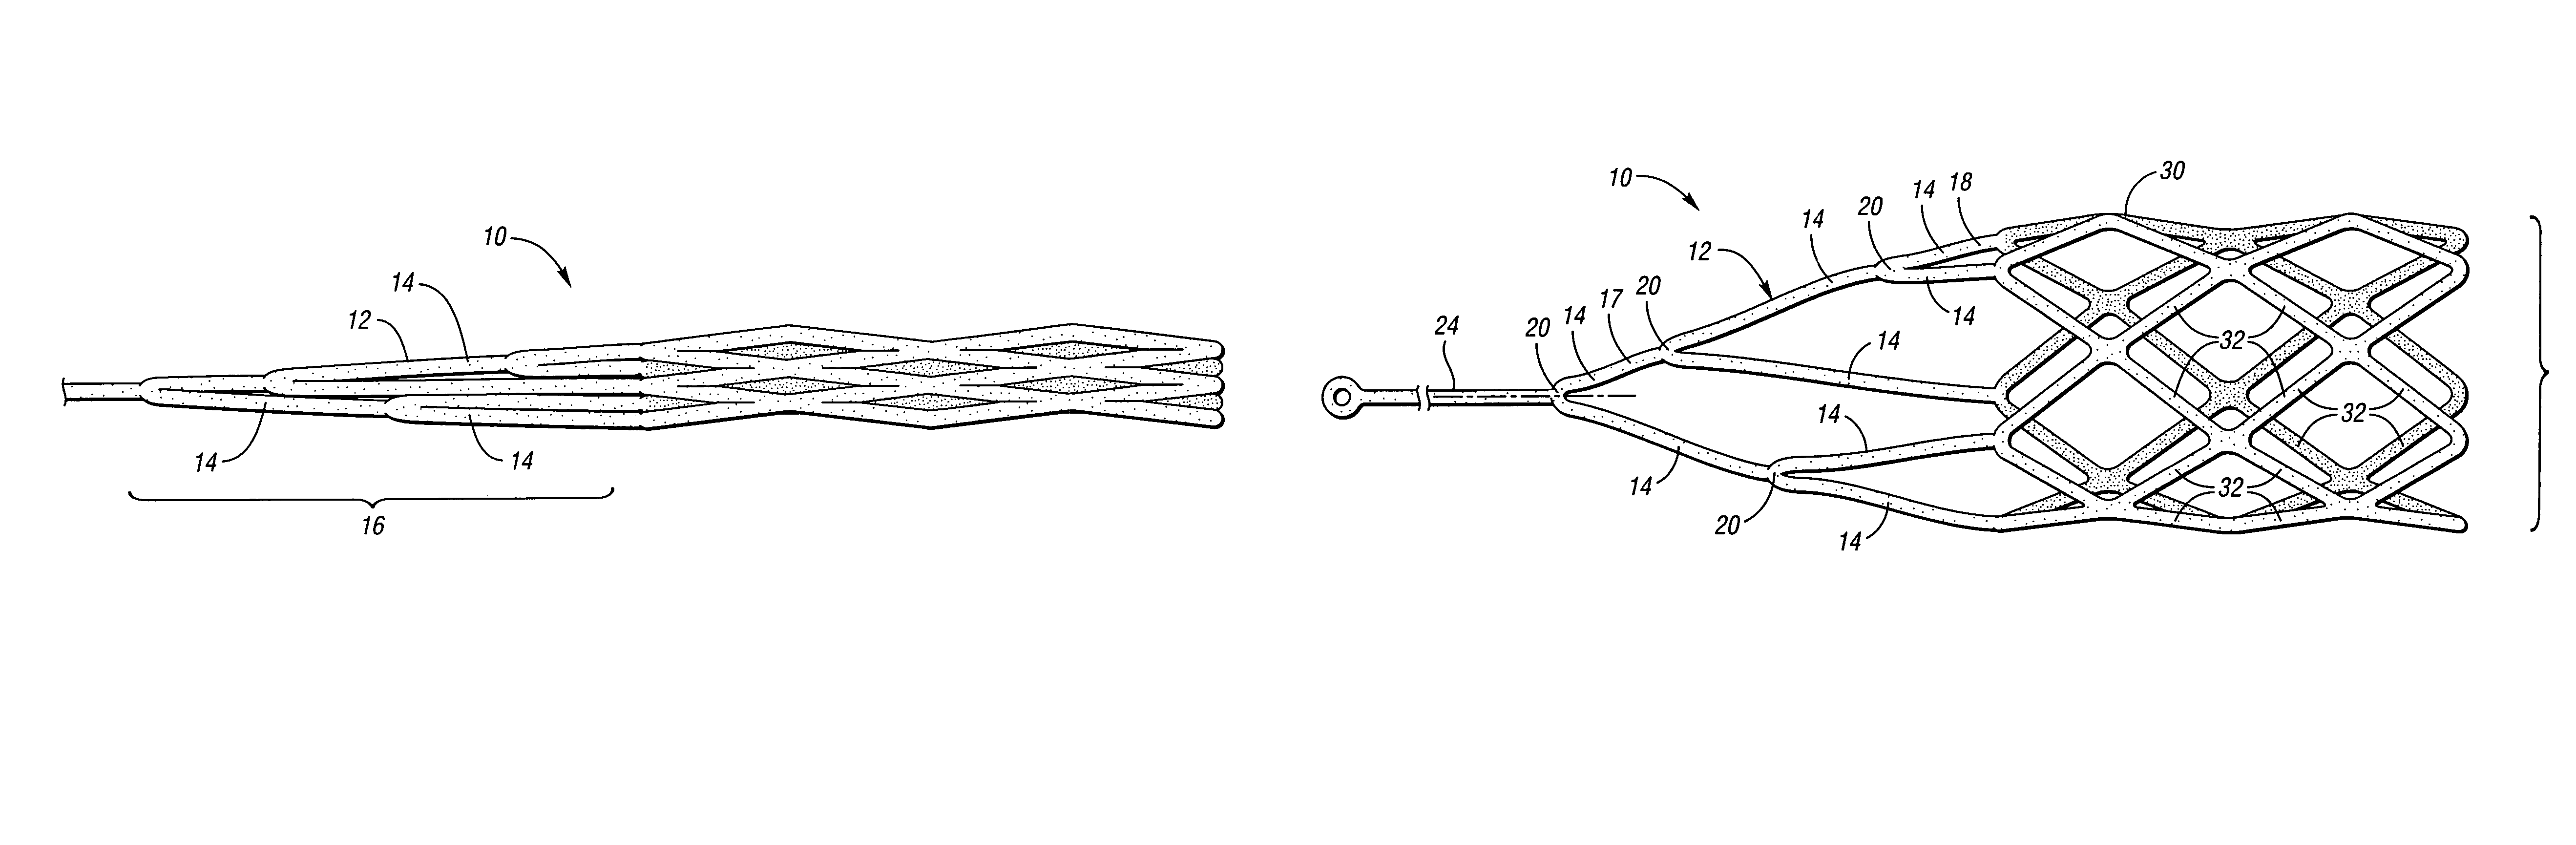 Retrievable device having a reticulation portion with staggered struts